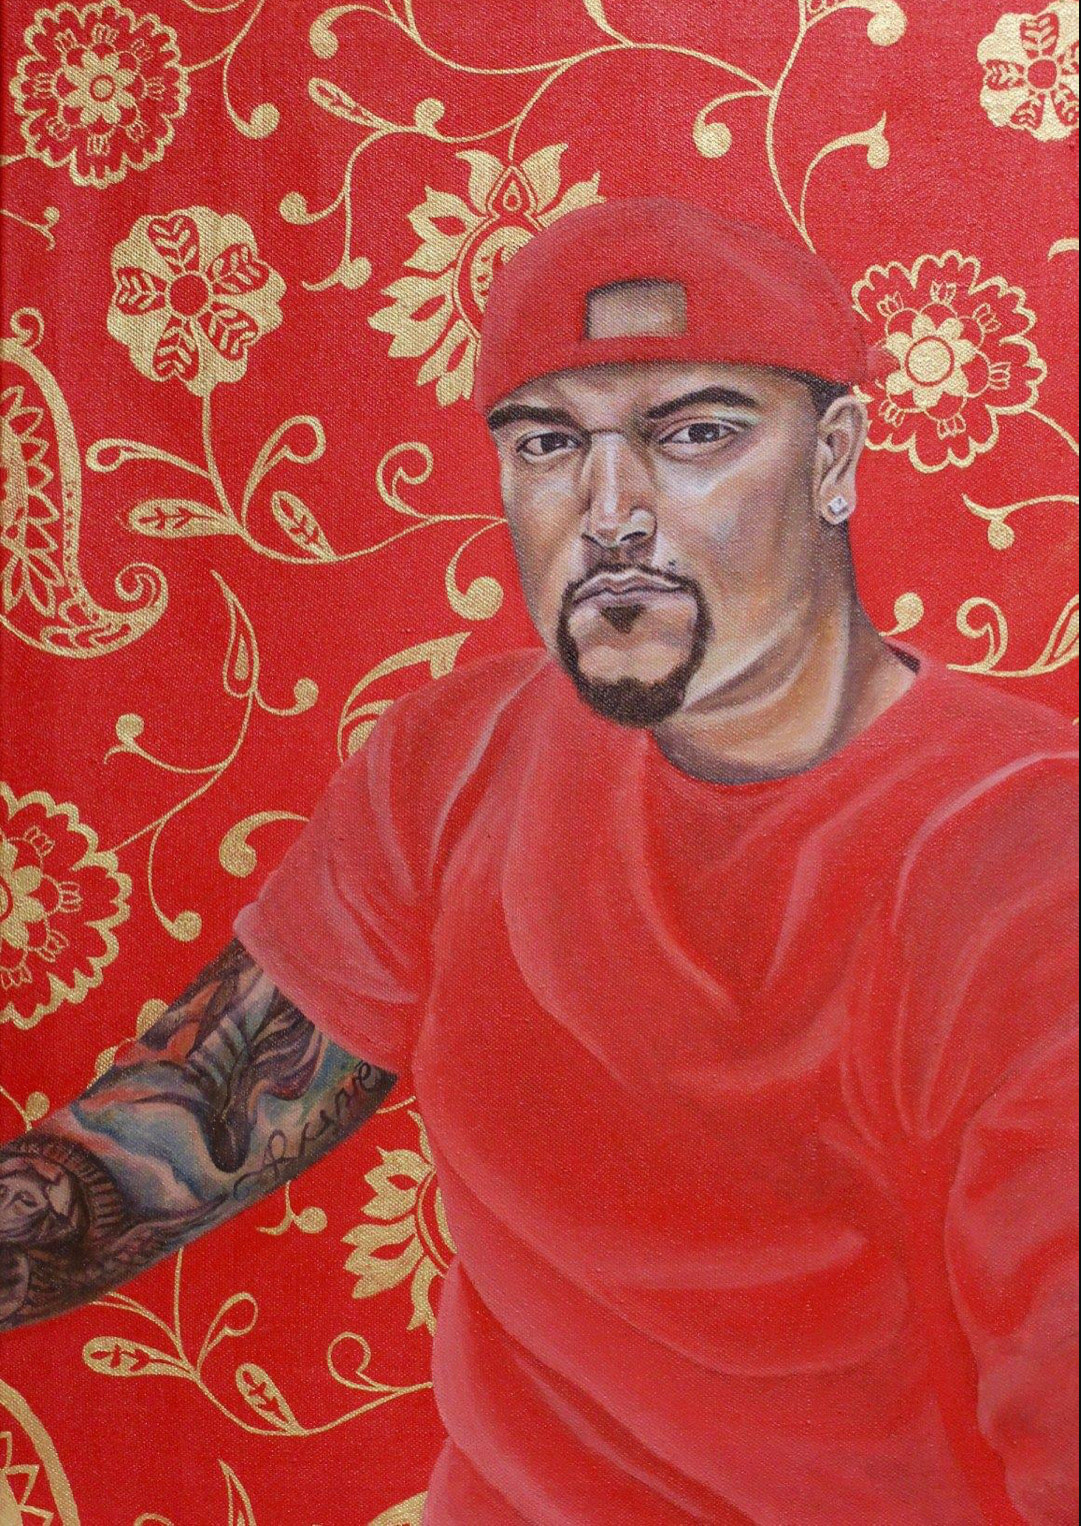 Portrait of Angel wearing a red baseball cap, red shirt, on a red background with gold designs.